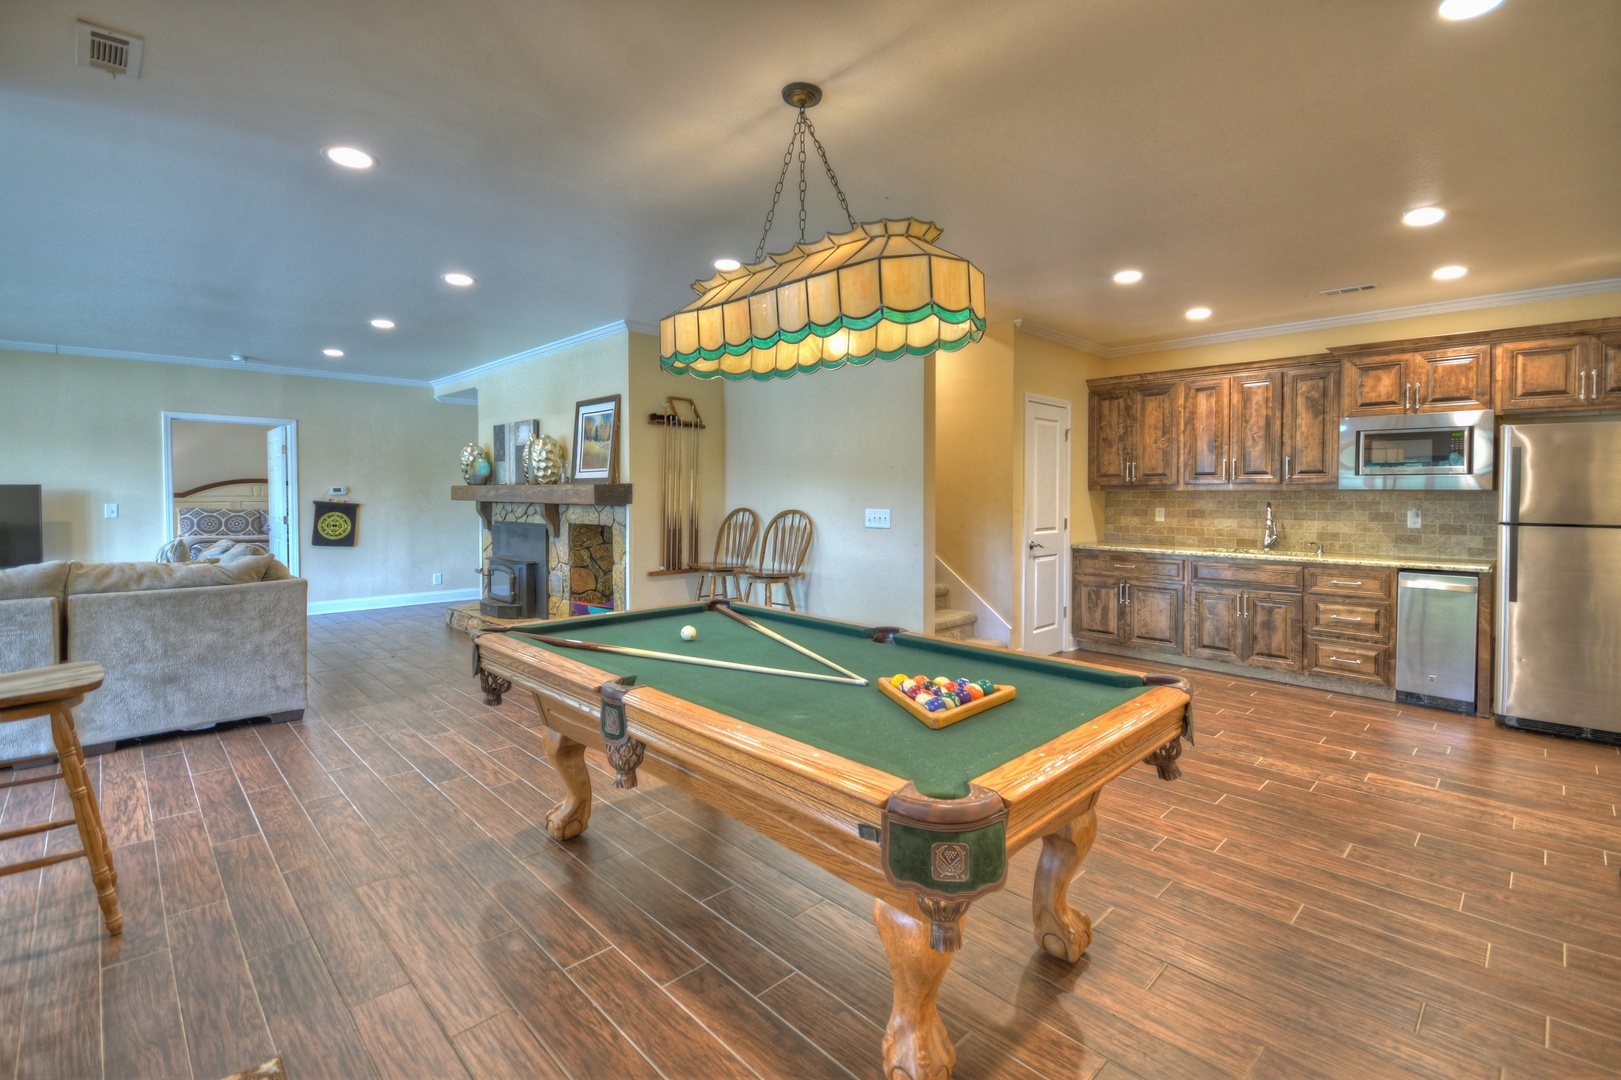 Jump Right In- Lower level living area with a pool table and kitchenette